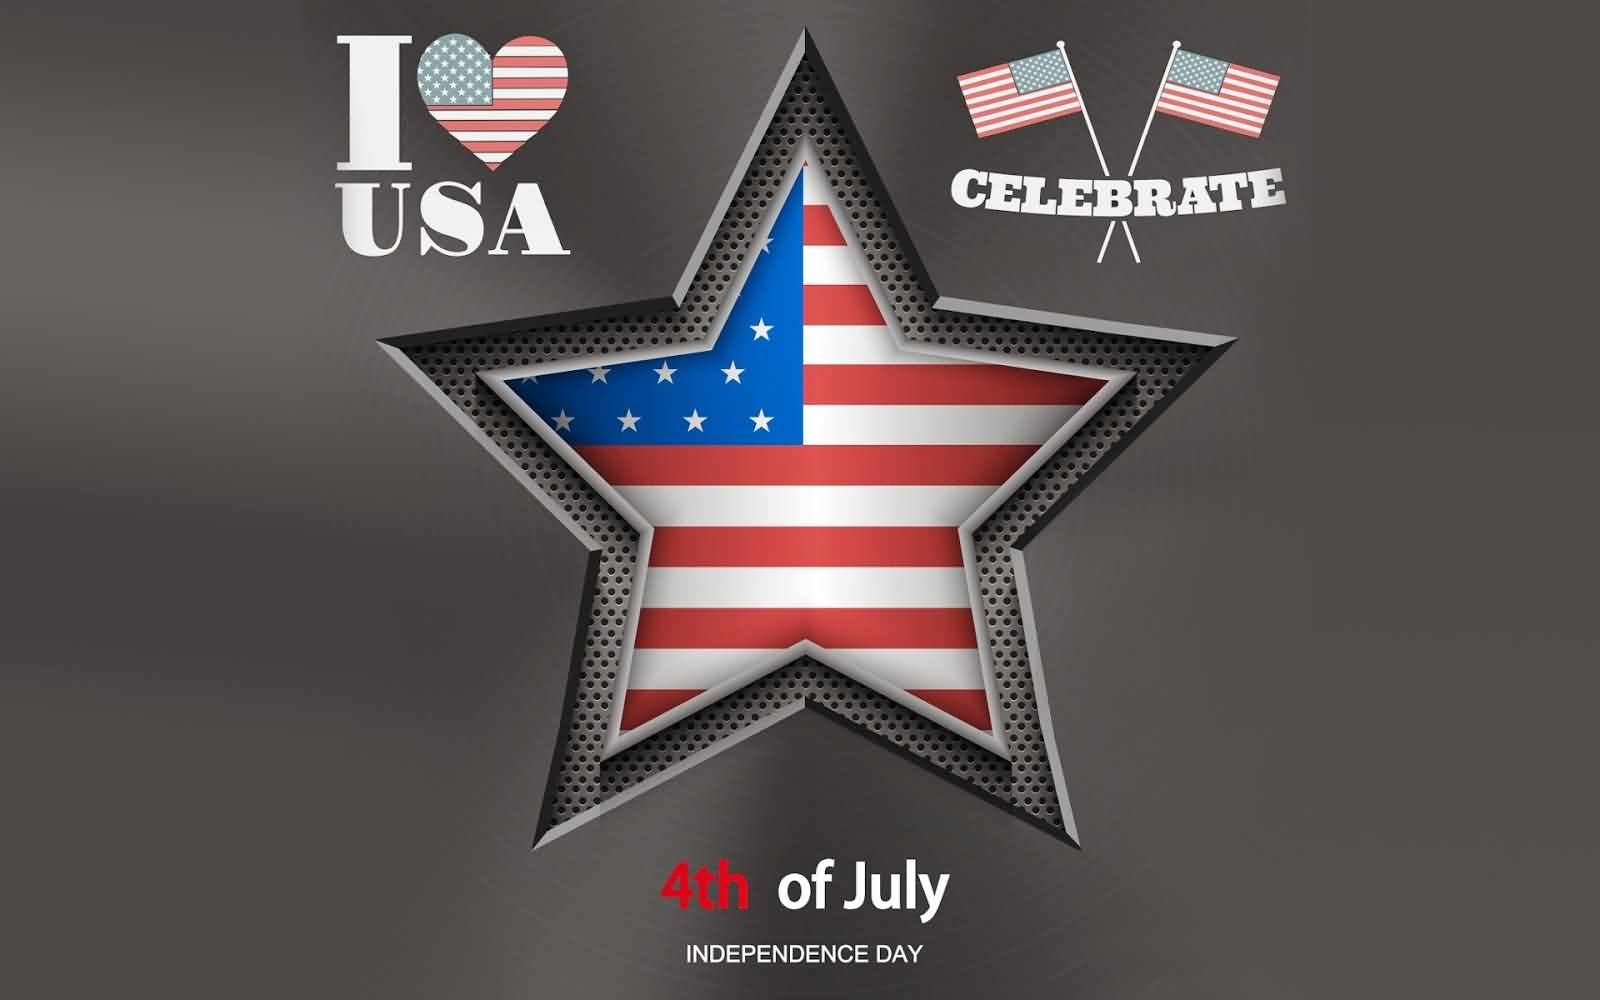 Celebrate 4th Of July Independence Day I Love USA Wishes Wallpaper